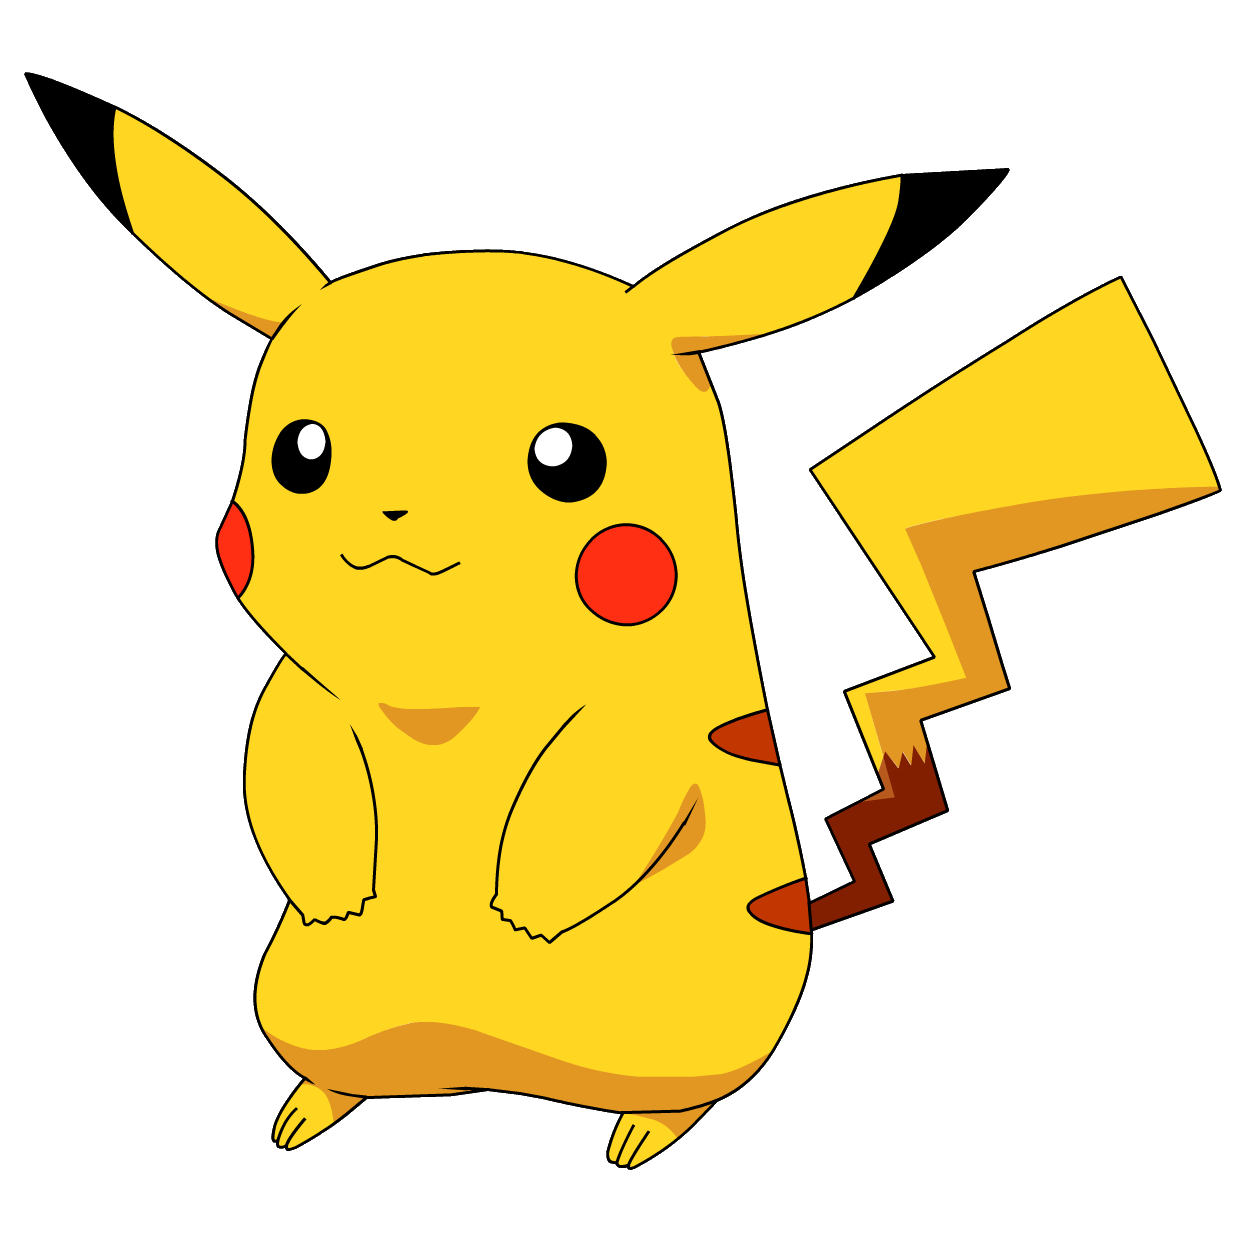 Pikachu - the instantly recognizable Pokemon mascot - image from ...